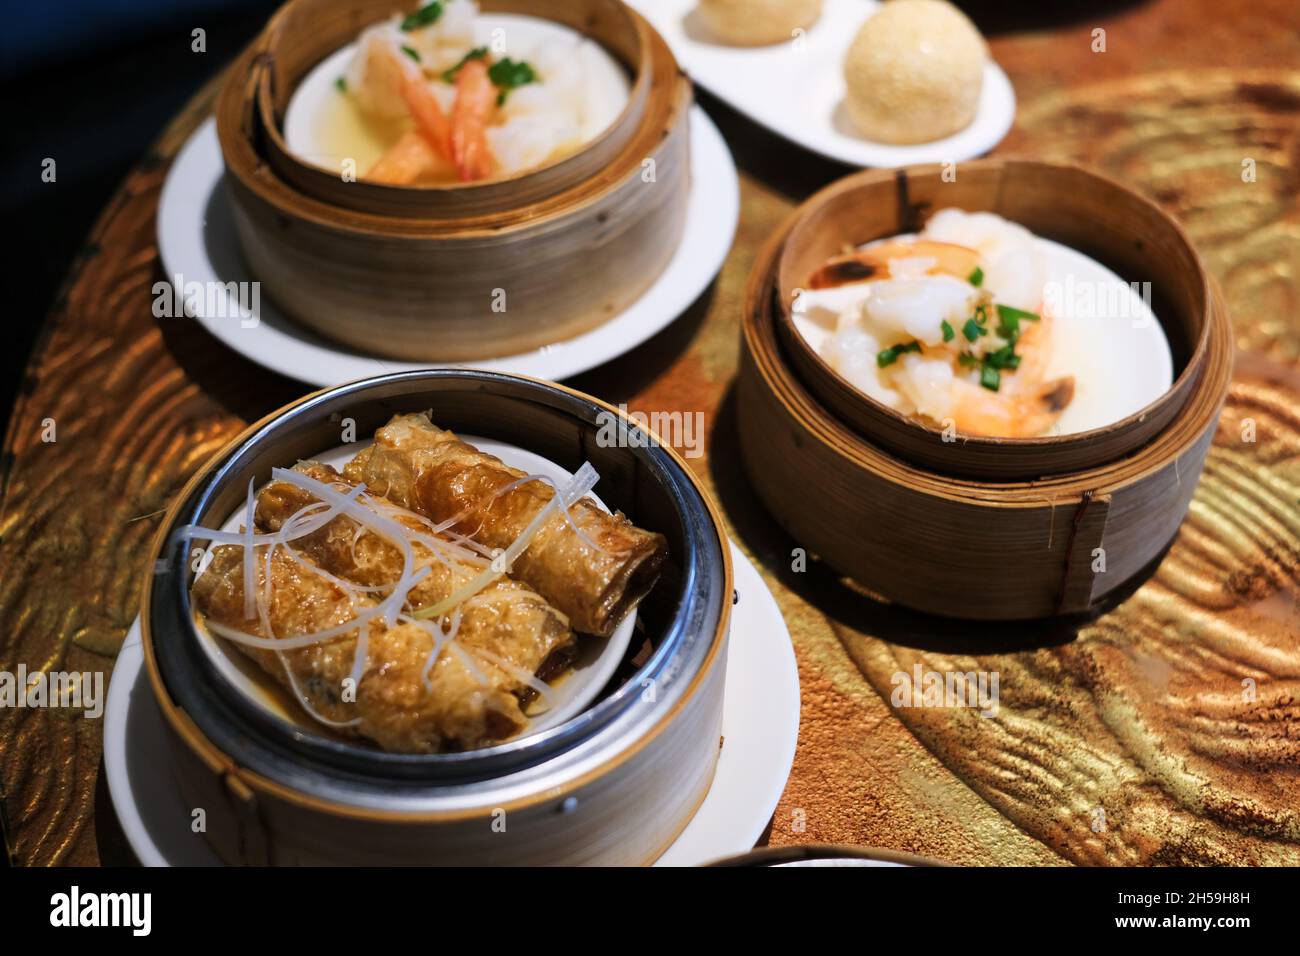 An assorted dishes of fried and steamed dim sum or Chinese dumpling, served in round bamboo steamers on a wooden table at a Chinese restaurant. Stock Photo